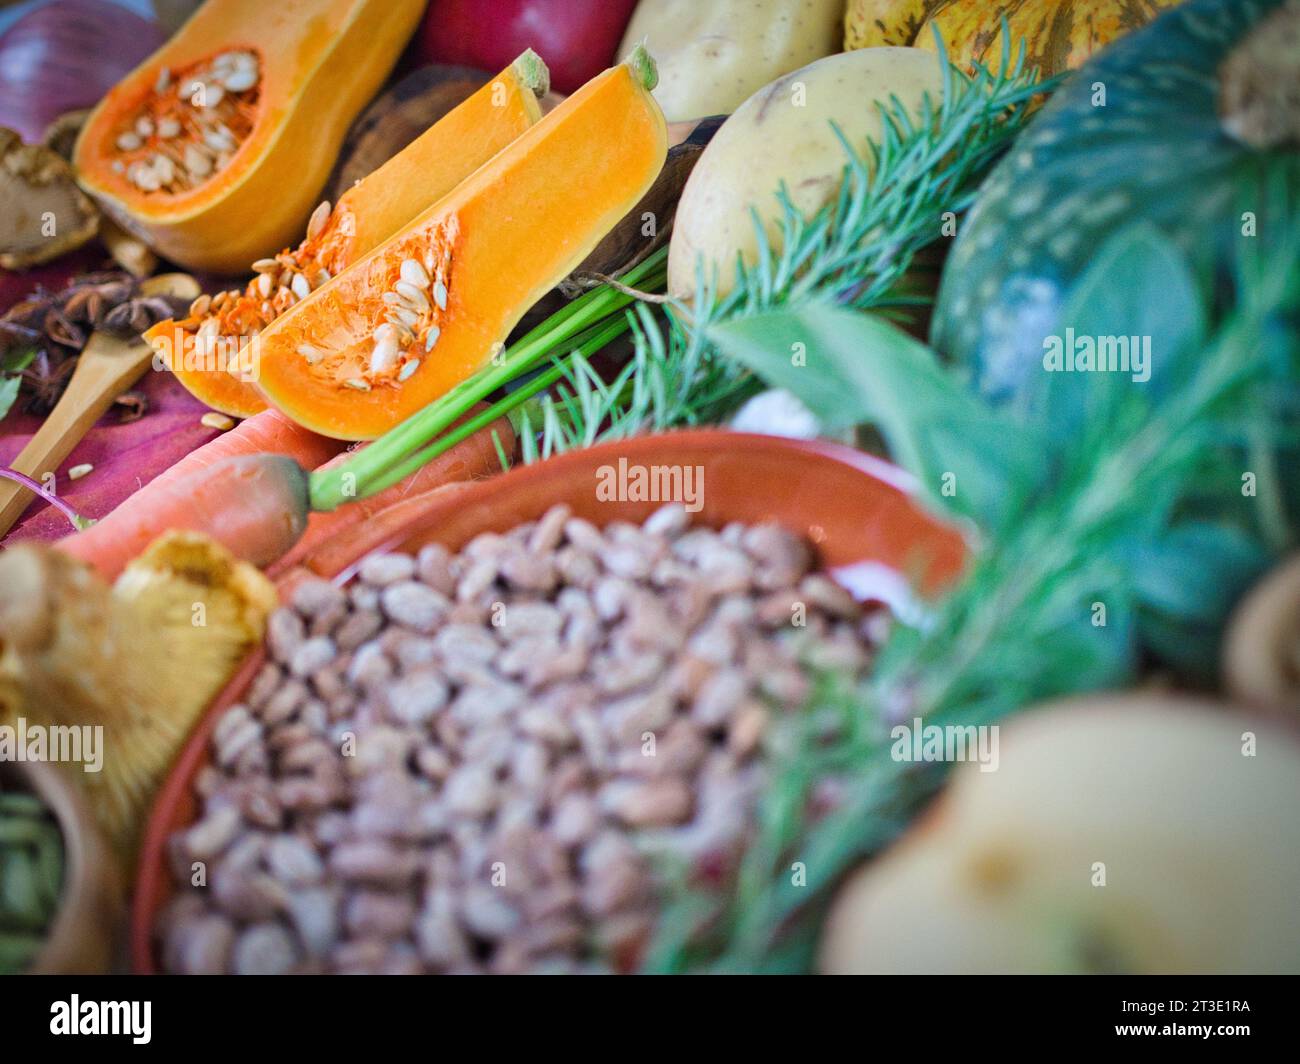 Beautiful ingredients array of colorful vegetarian ingredients with pinto bean legume protein for fall, Thanksgiving, or year round healthy diet. Stock Photo